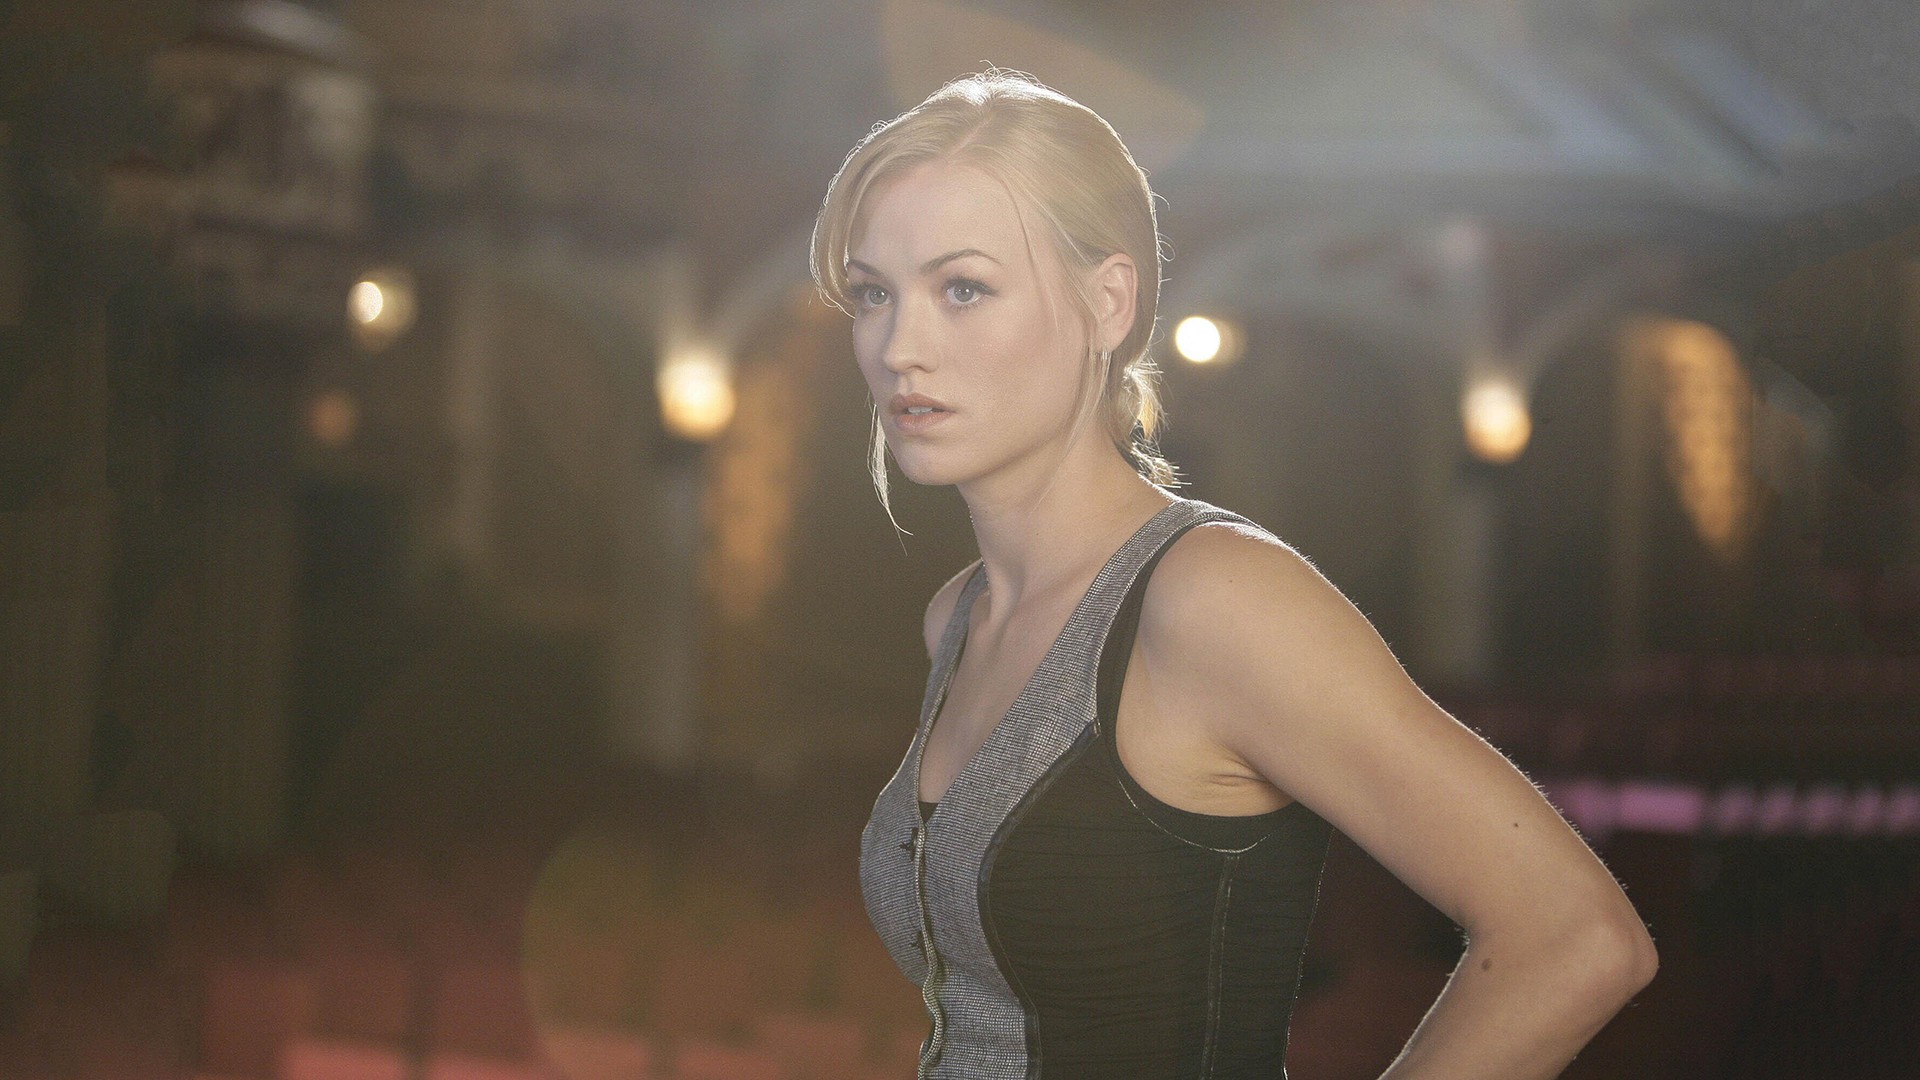 Women Model Yvonne Strahovski Actress Blonde Looking Away Looking Into The Distance Chuck Tv Series  1920x1080